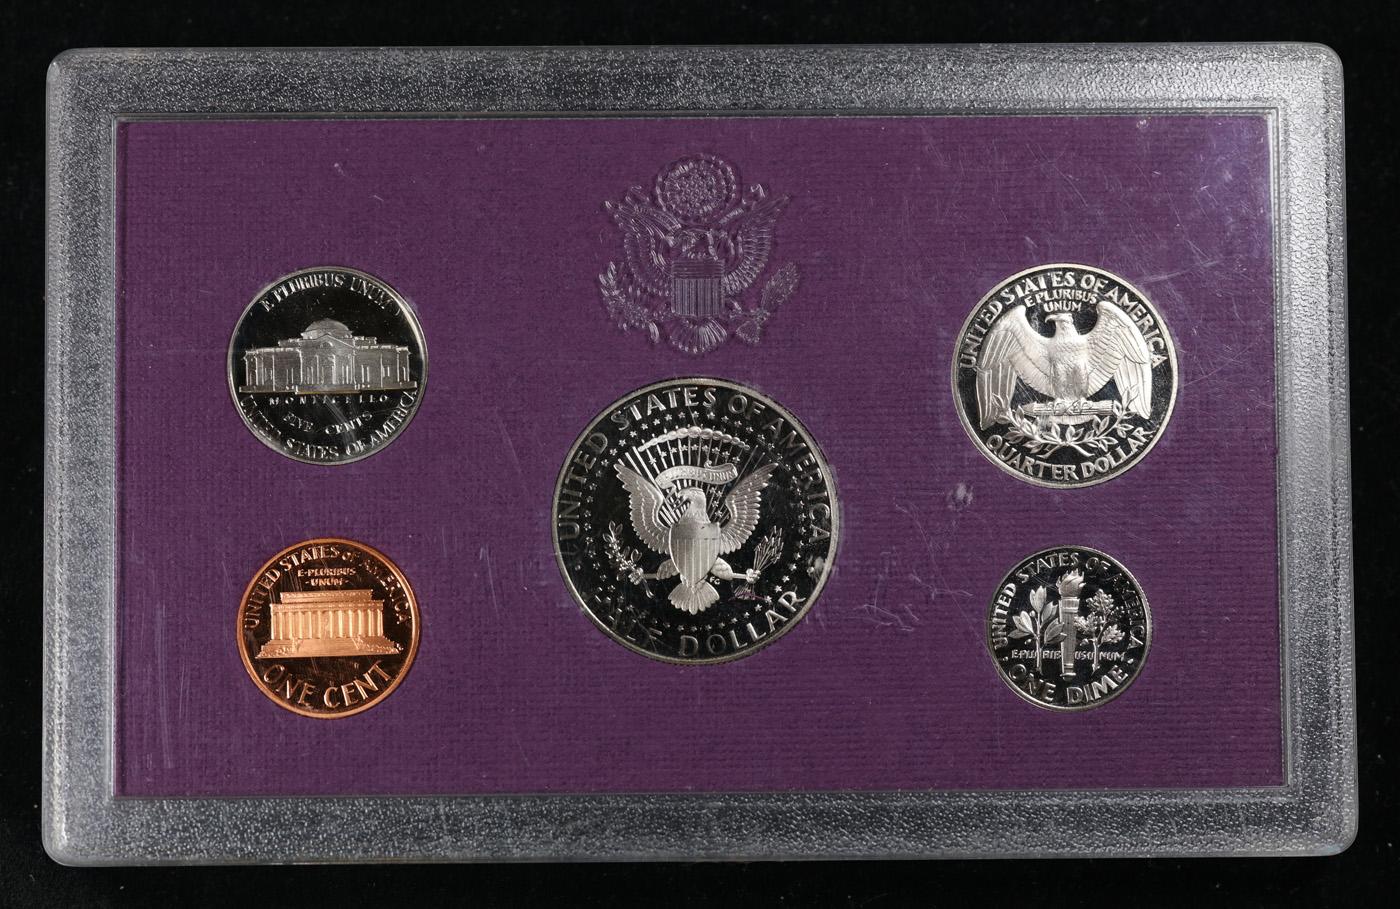 1993 United States Mint Proof Set 5 coins - No Outer Box